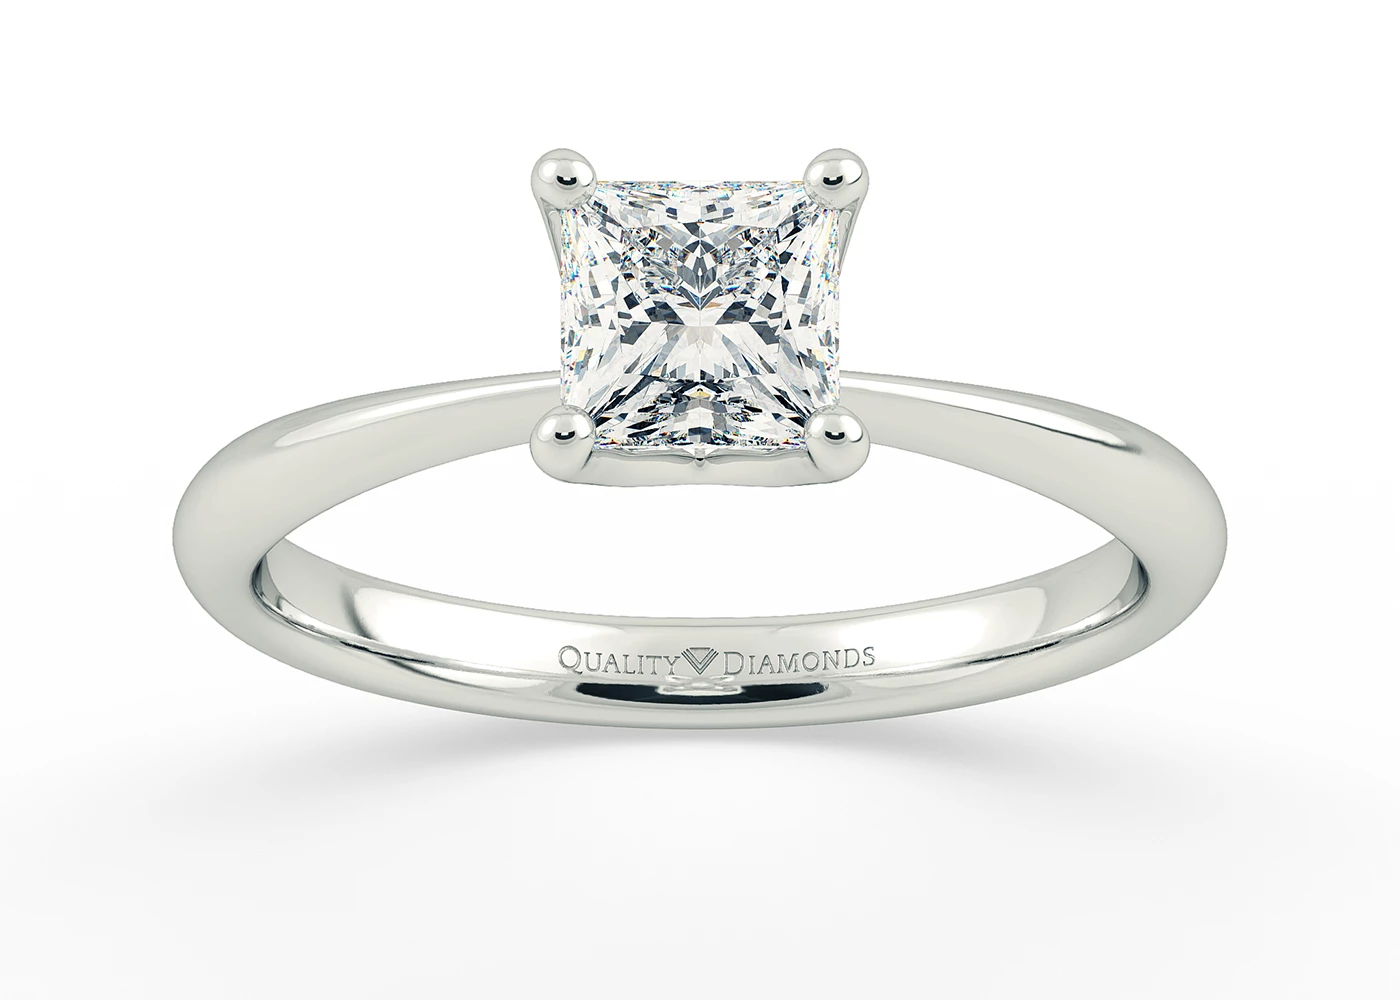 Half Carat Princess Solitaire Diamond Engagement Ring in 18K White Gold